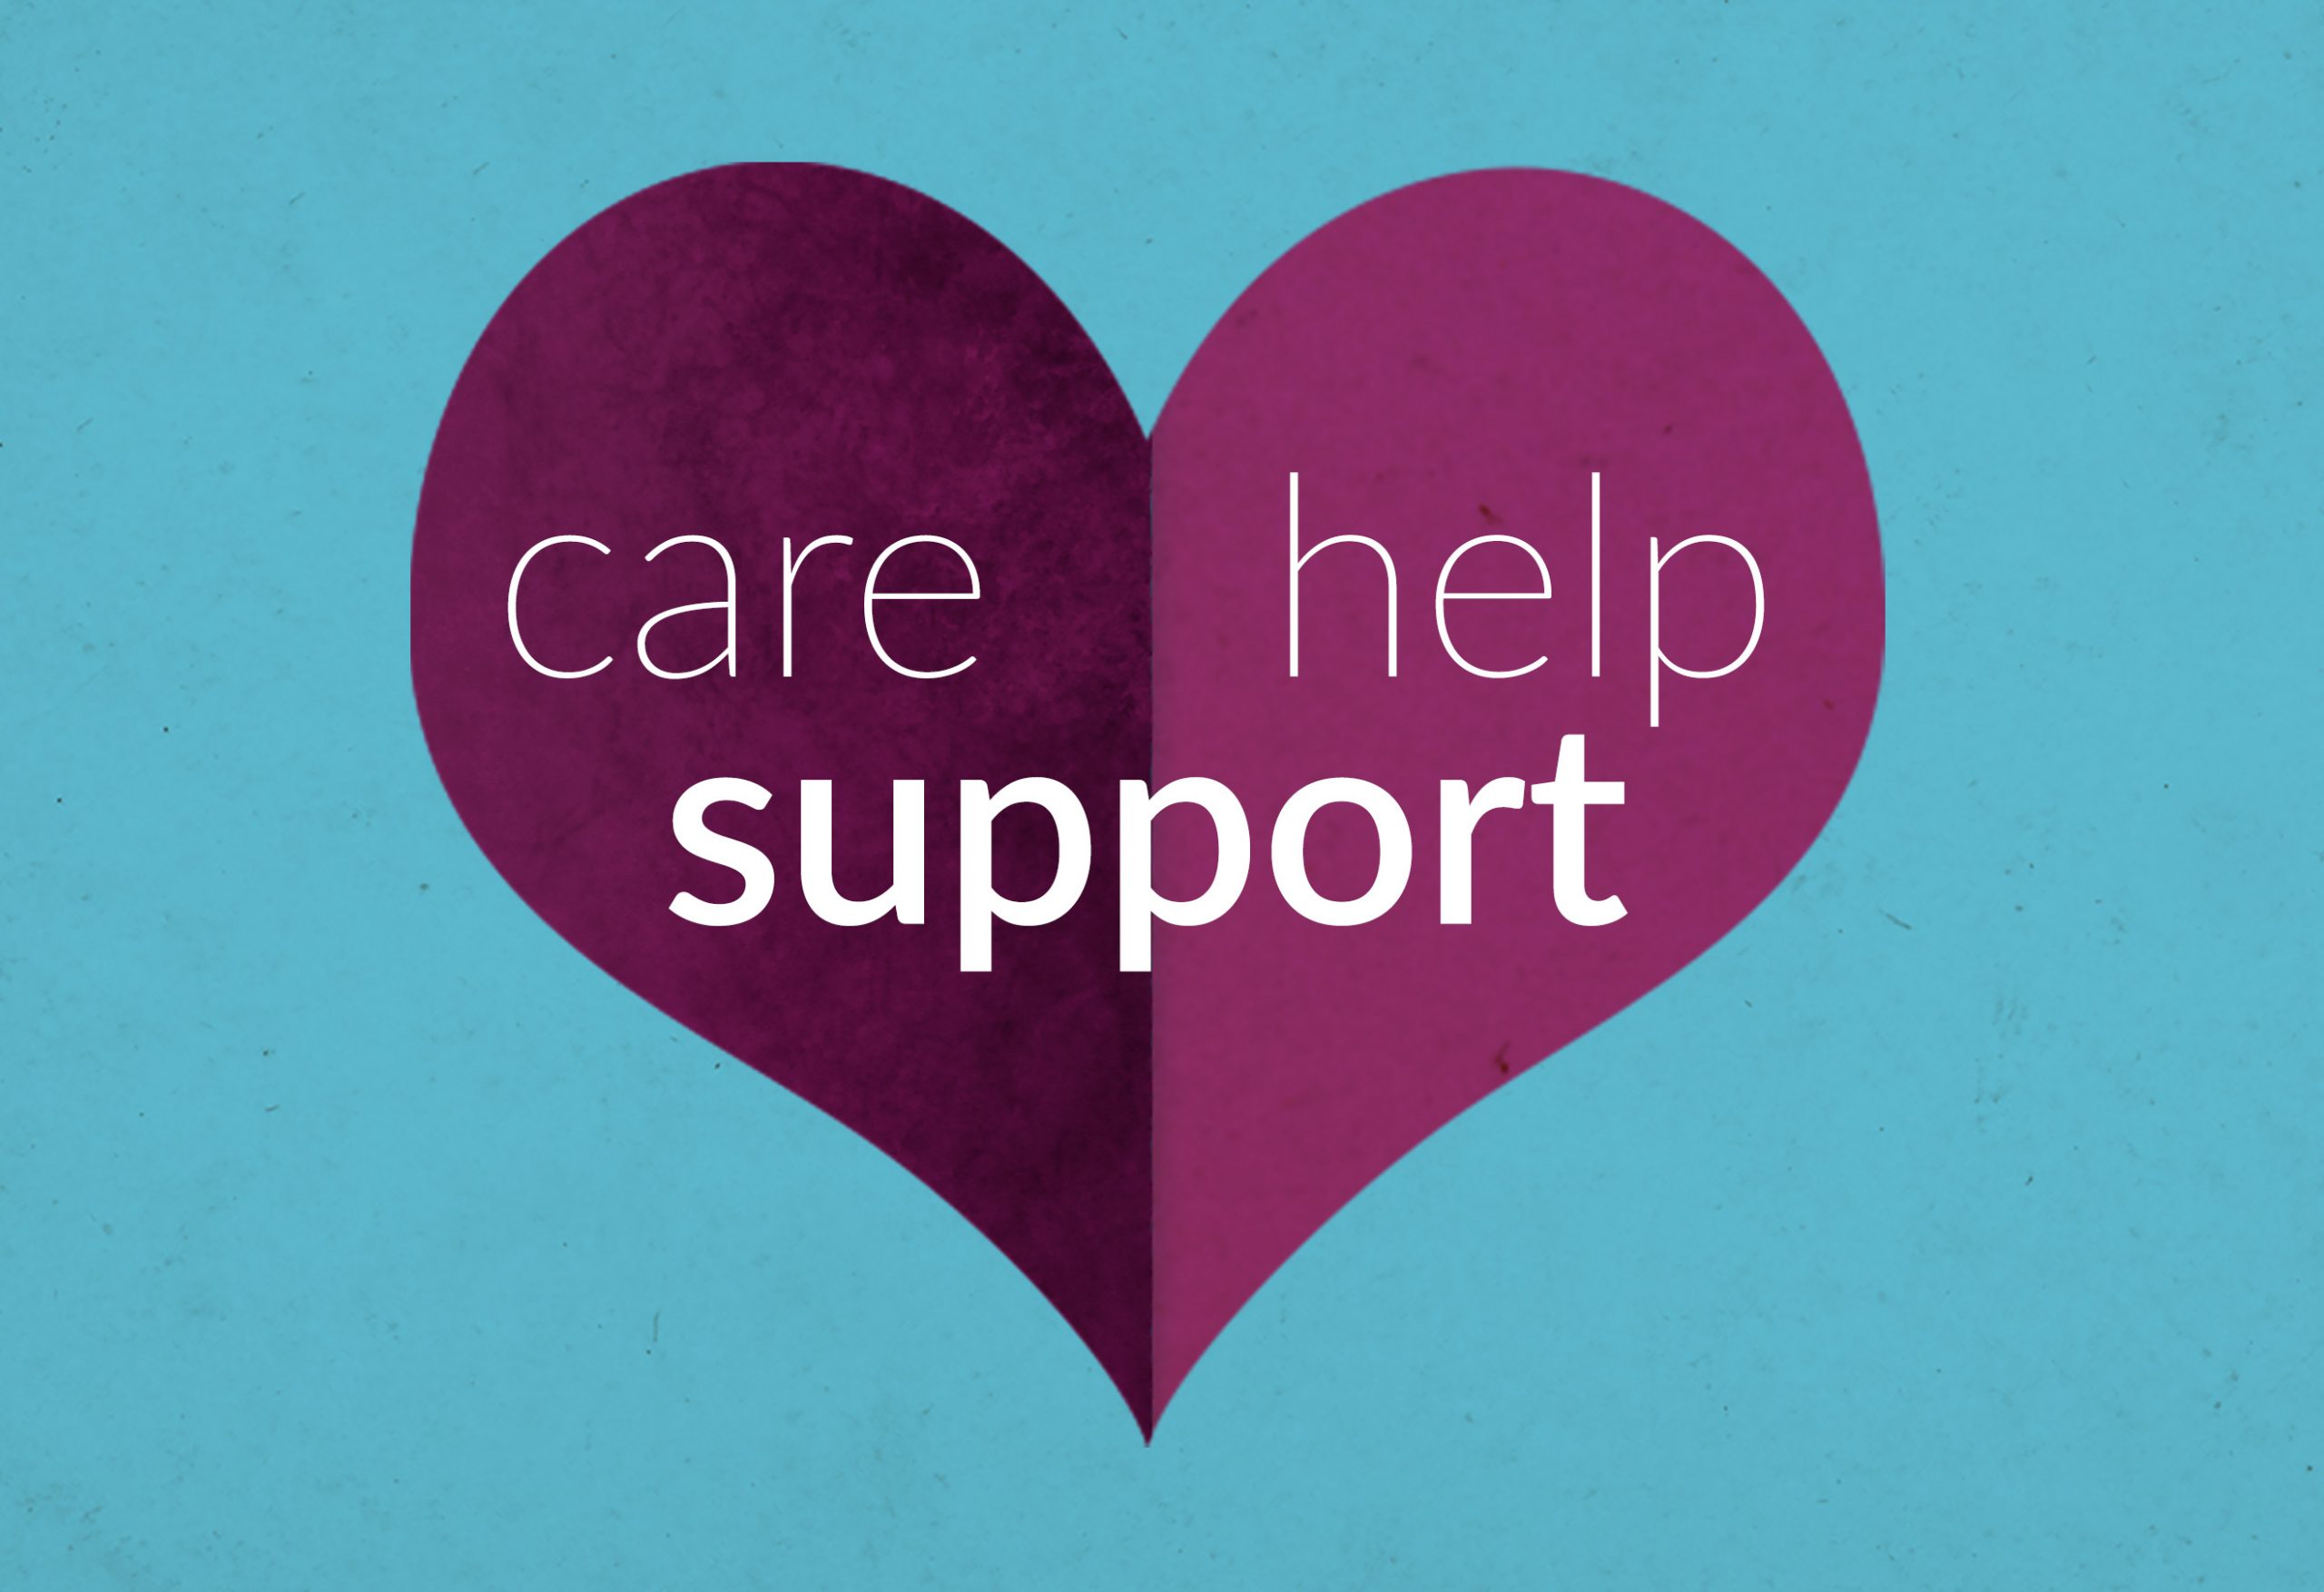 care, hope, support